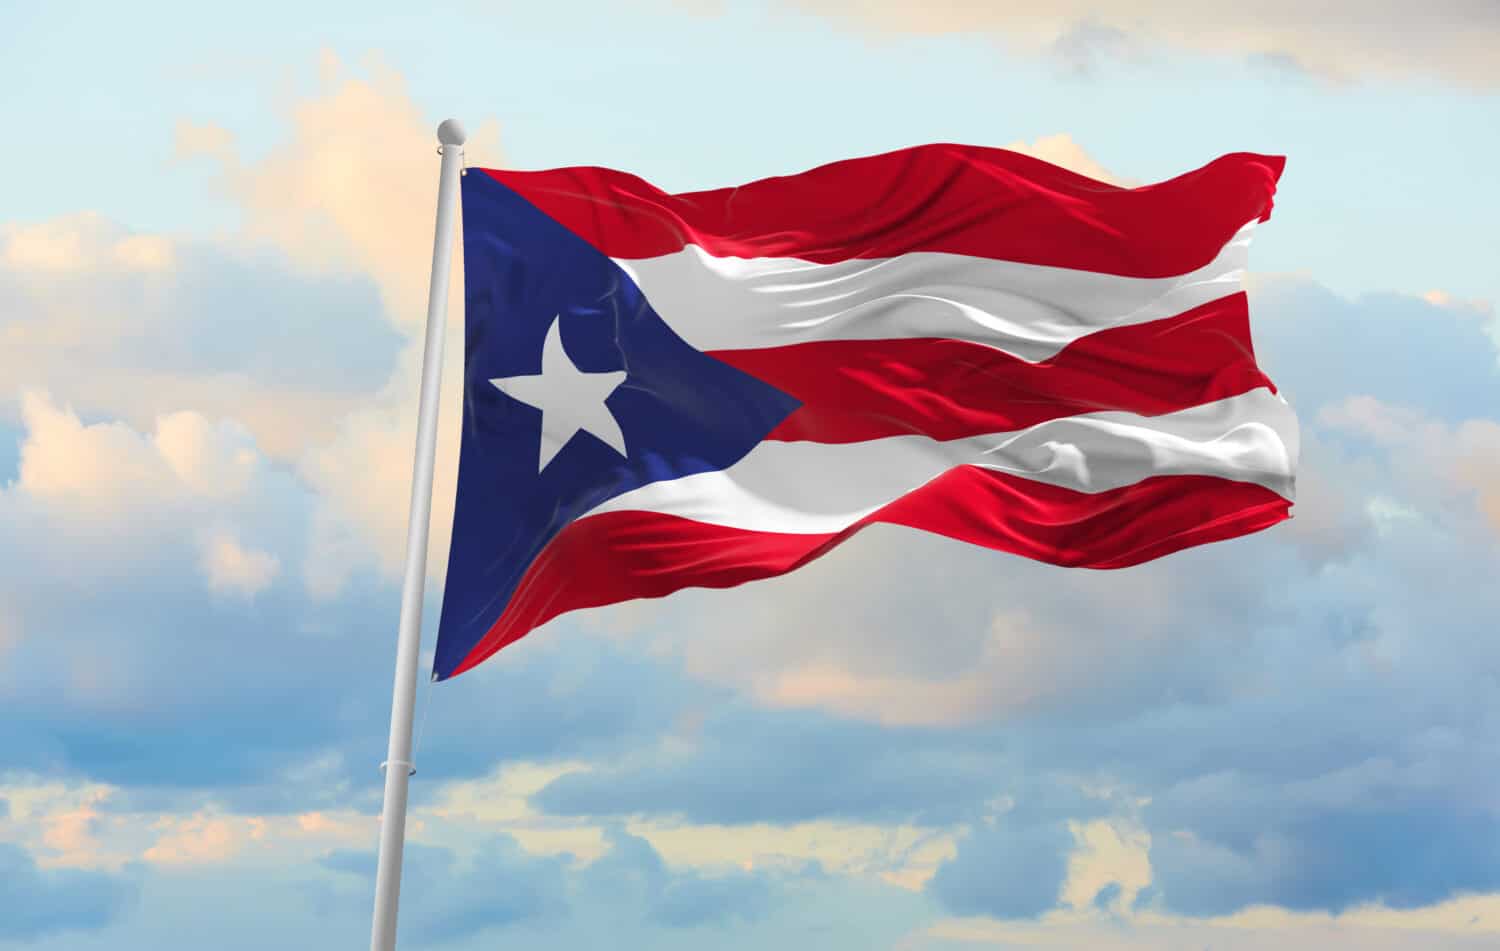 Large Puerto Rico flag waving in the wind